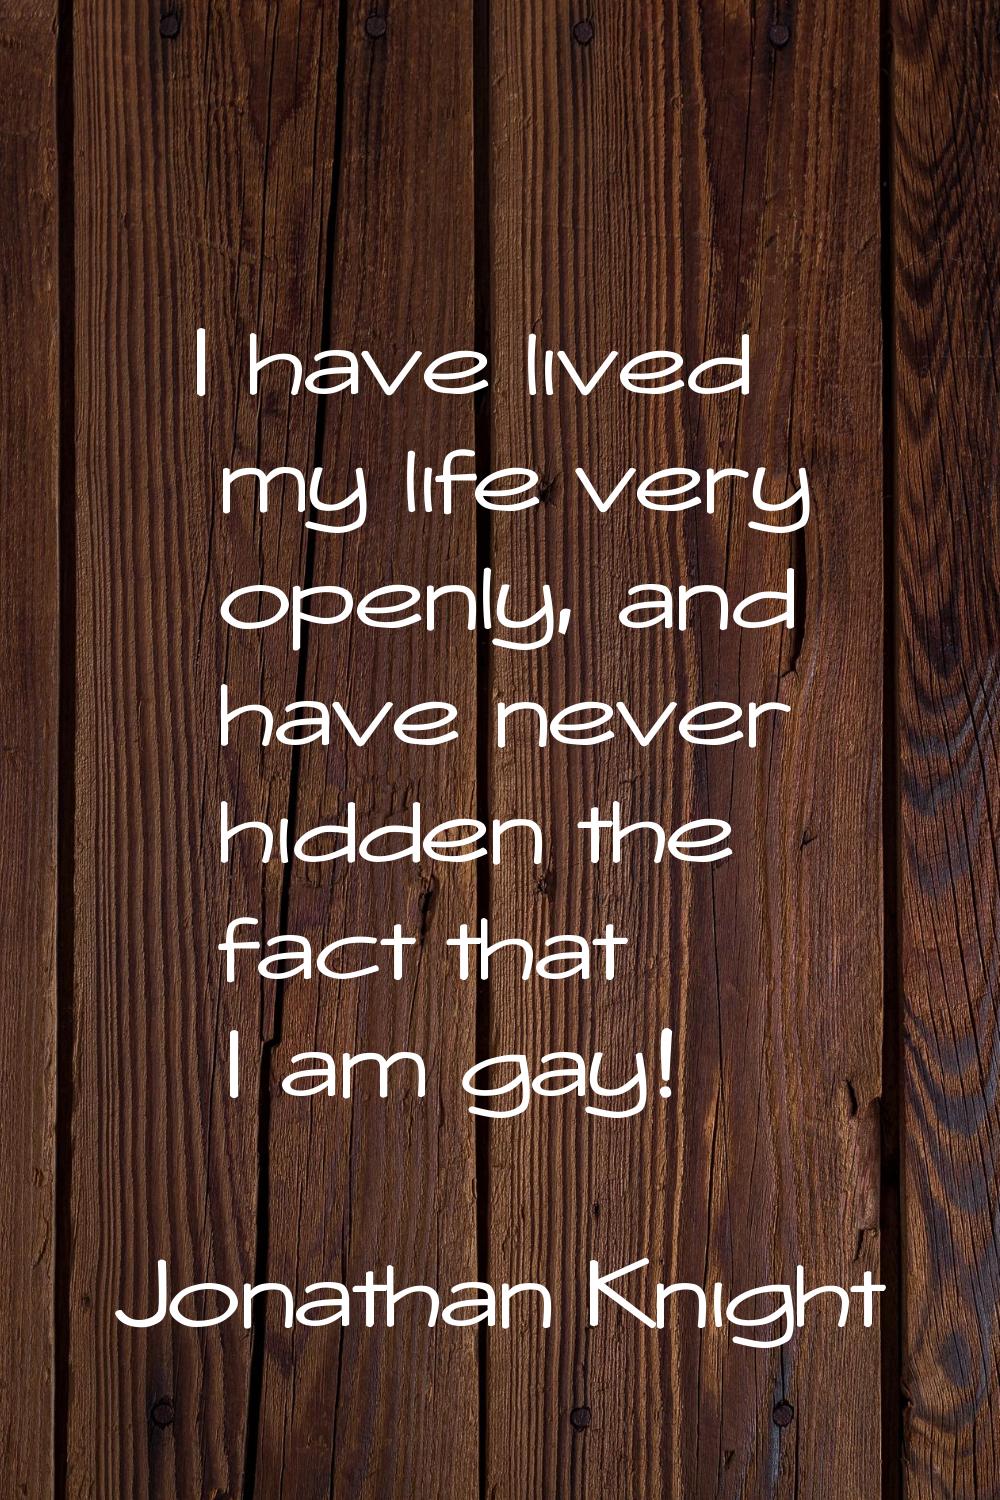 I have lived my life very openly, and have never hidden the fact that I am gay!